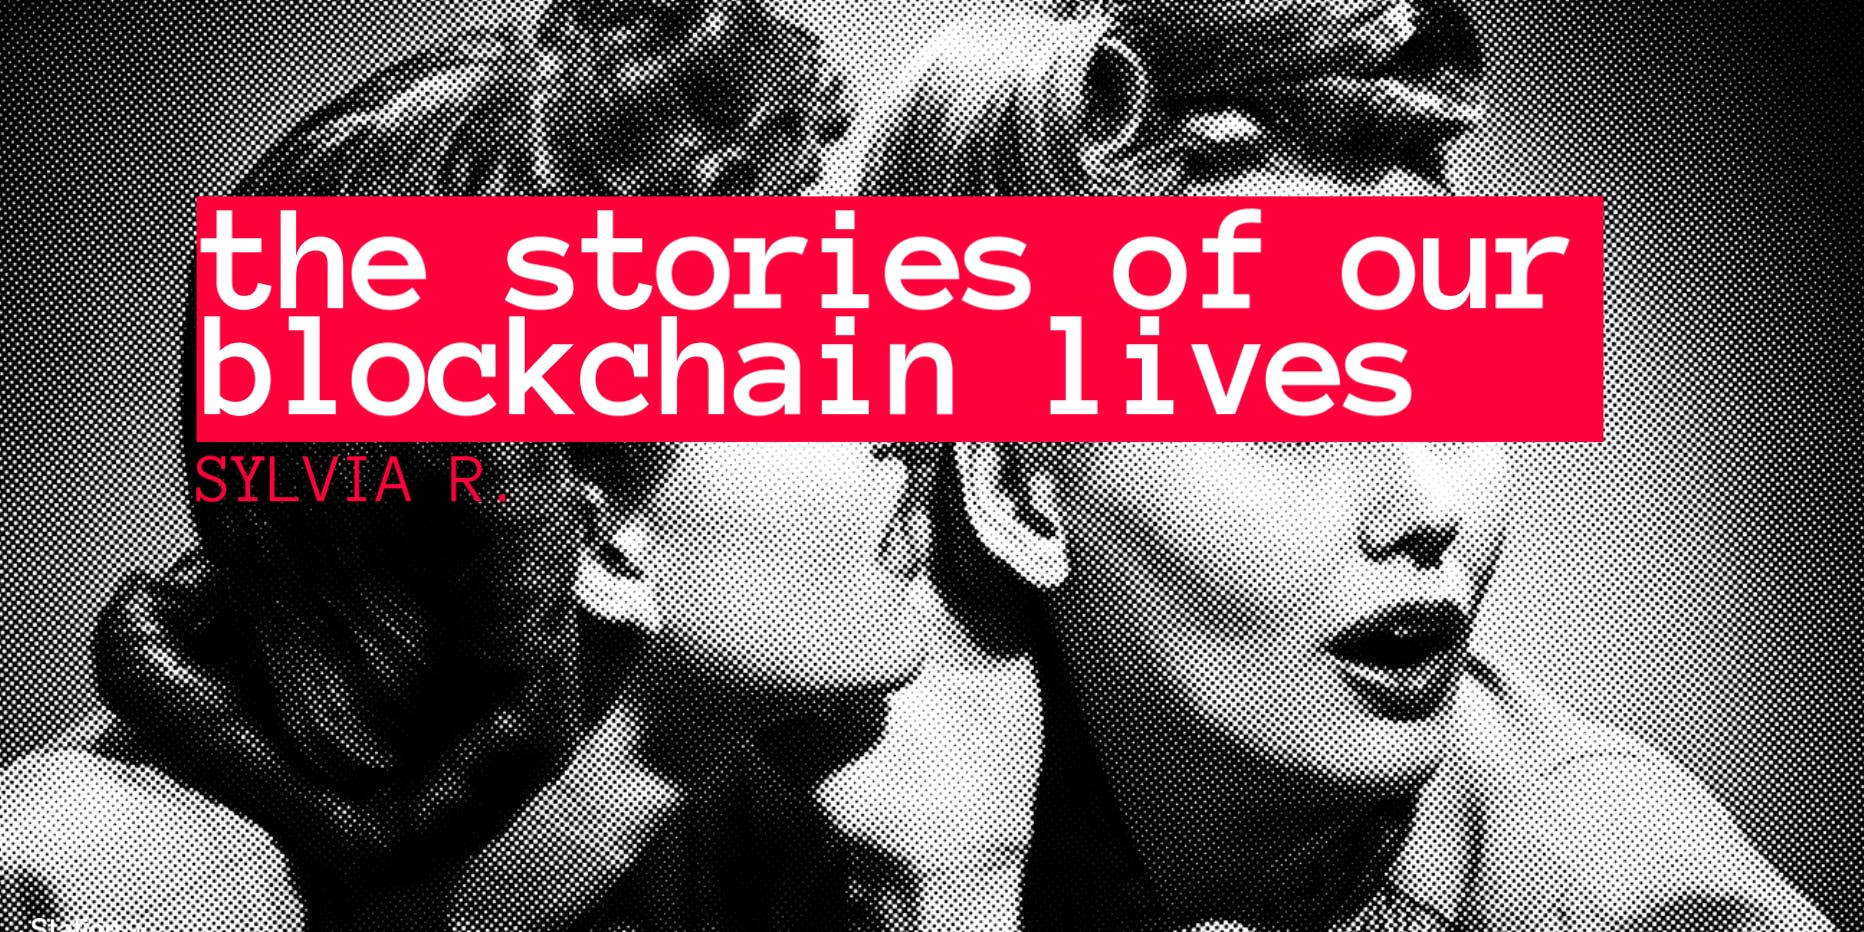 Thumbnail of Station Newstand | The Stories of Our Blockchain Lives by Sylvia R.